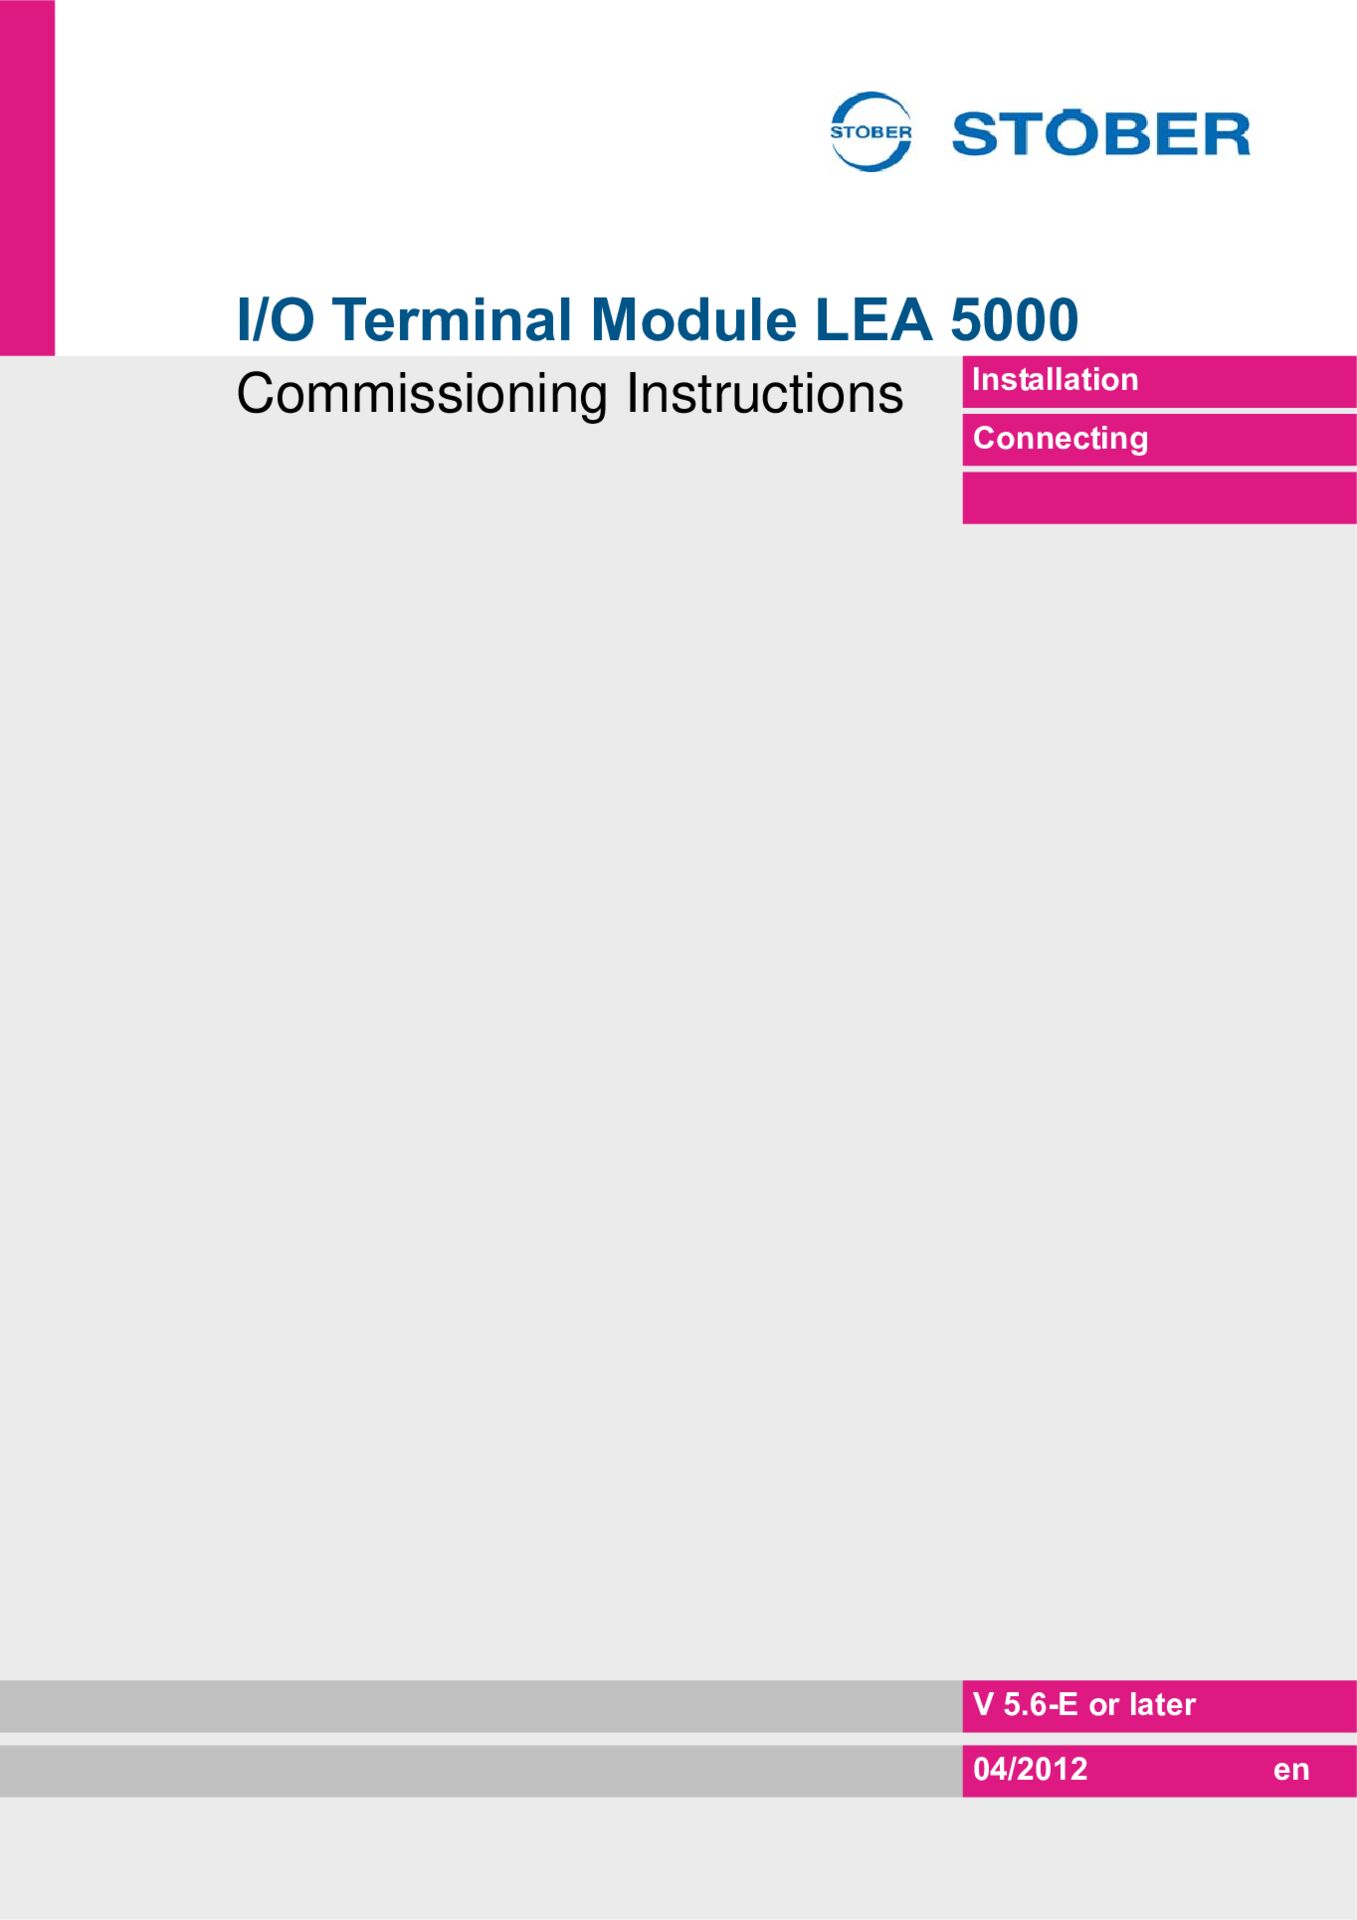 Commissioning instructions LEA 5000 terminal module